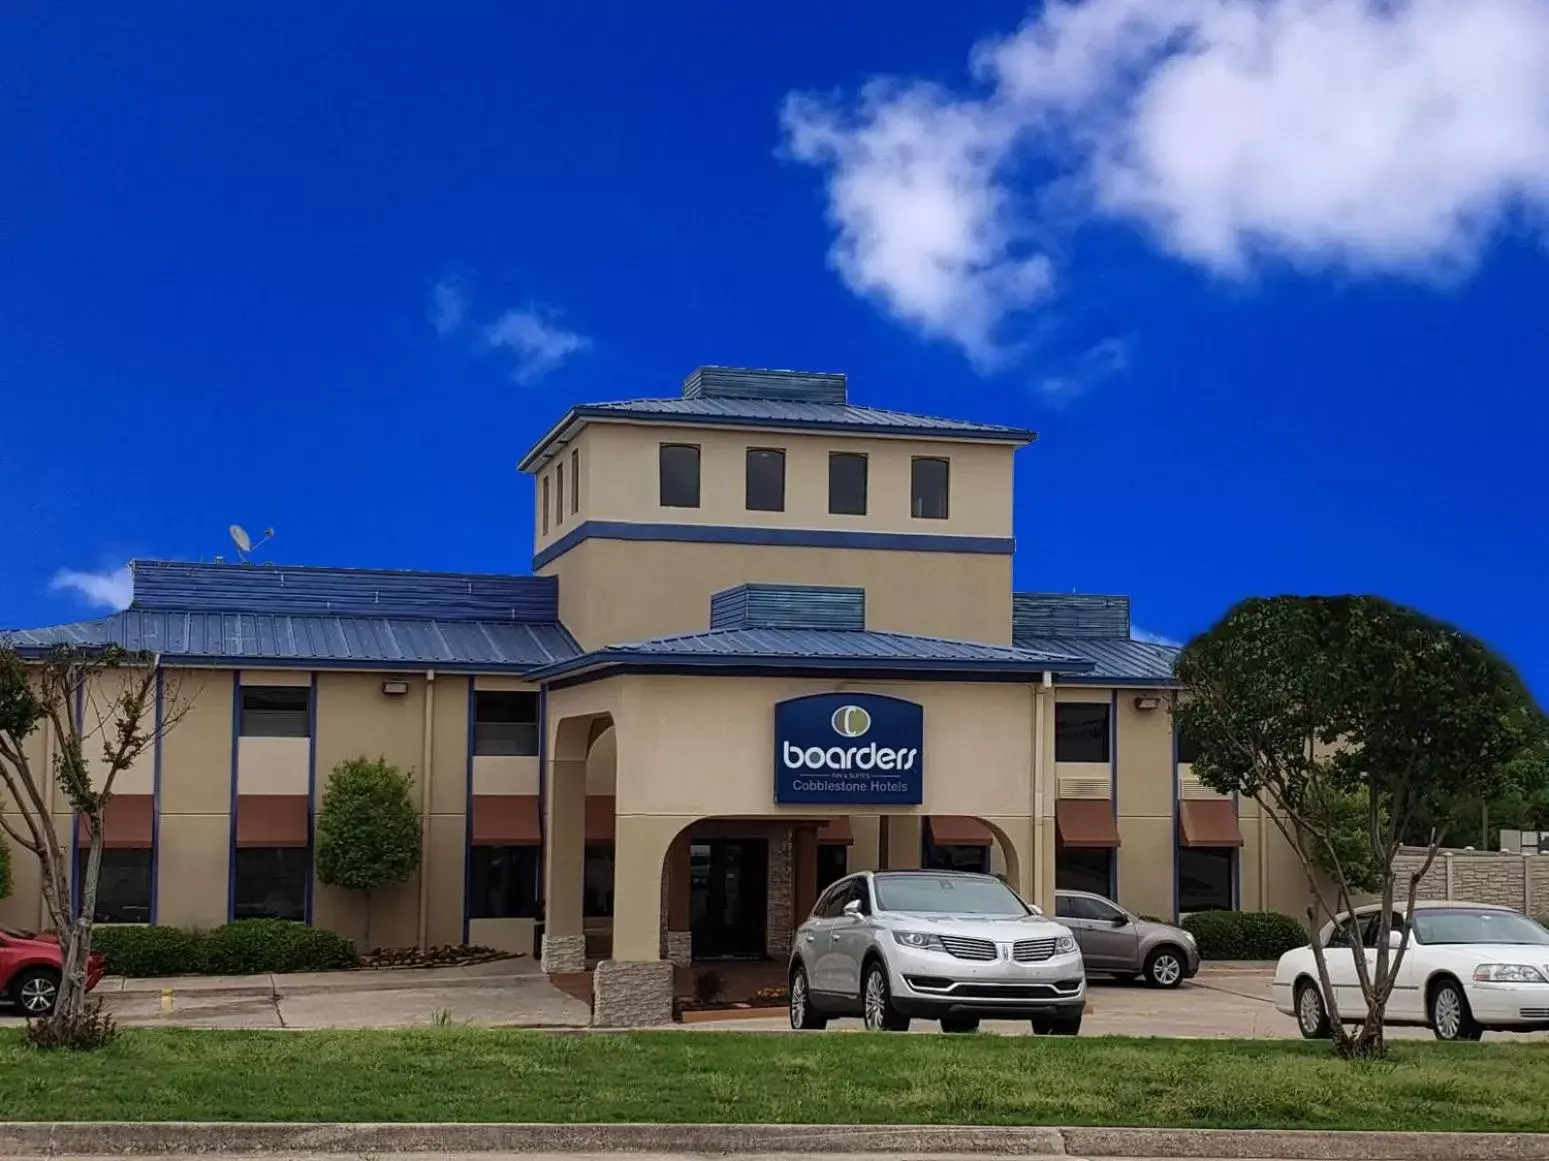 Property building in Boarders Inn and Suites by Cobblestone Hotels - Ardmore